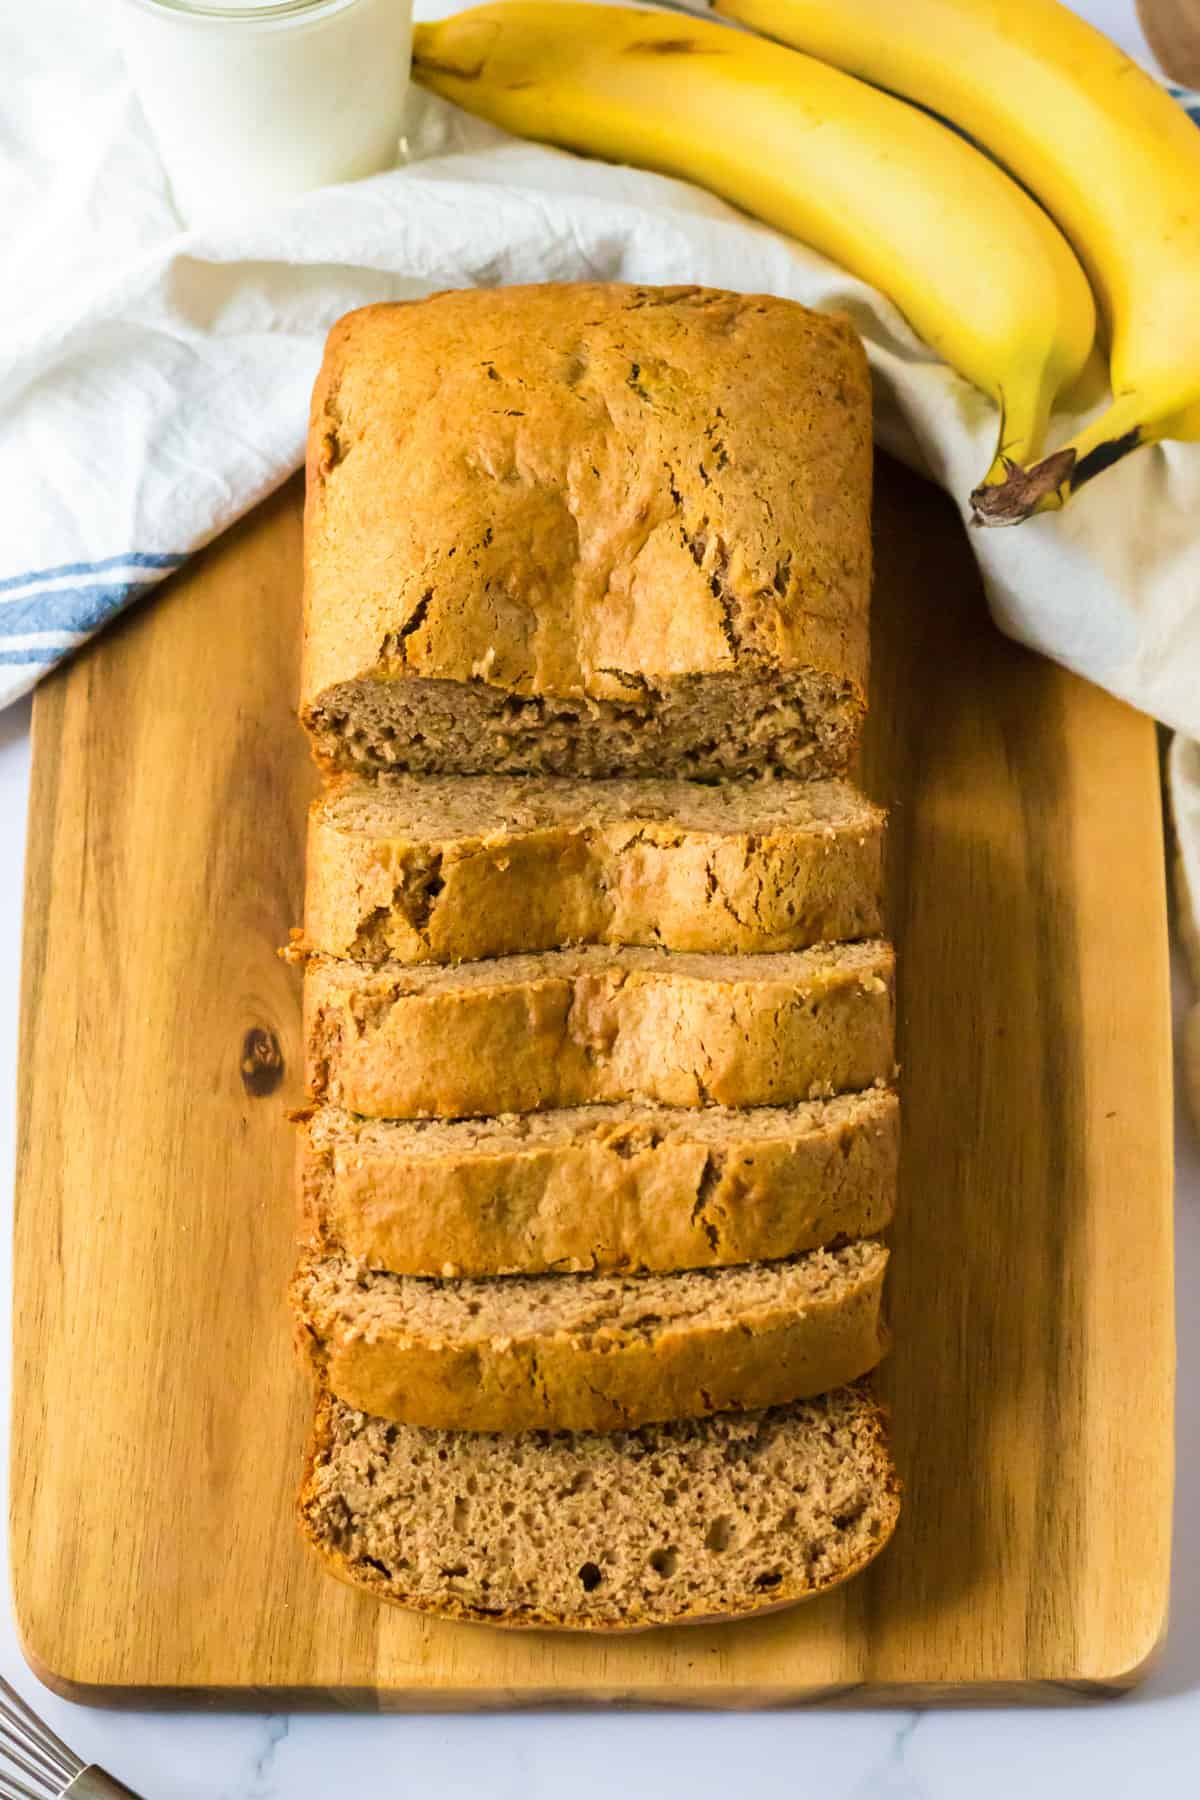 Sliced loaf of banana bread on wood cutting board with a white linen and fresh bananas.